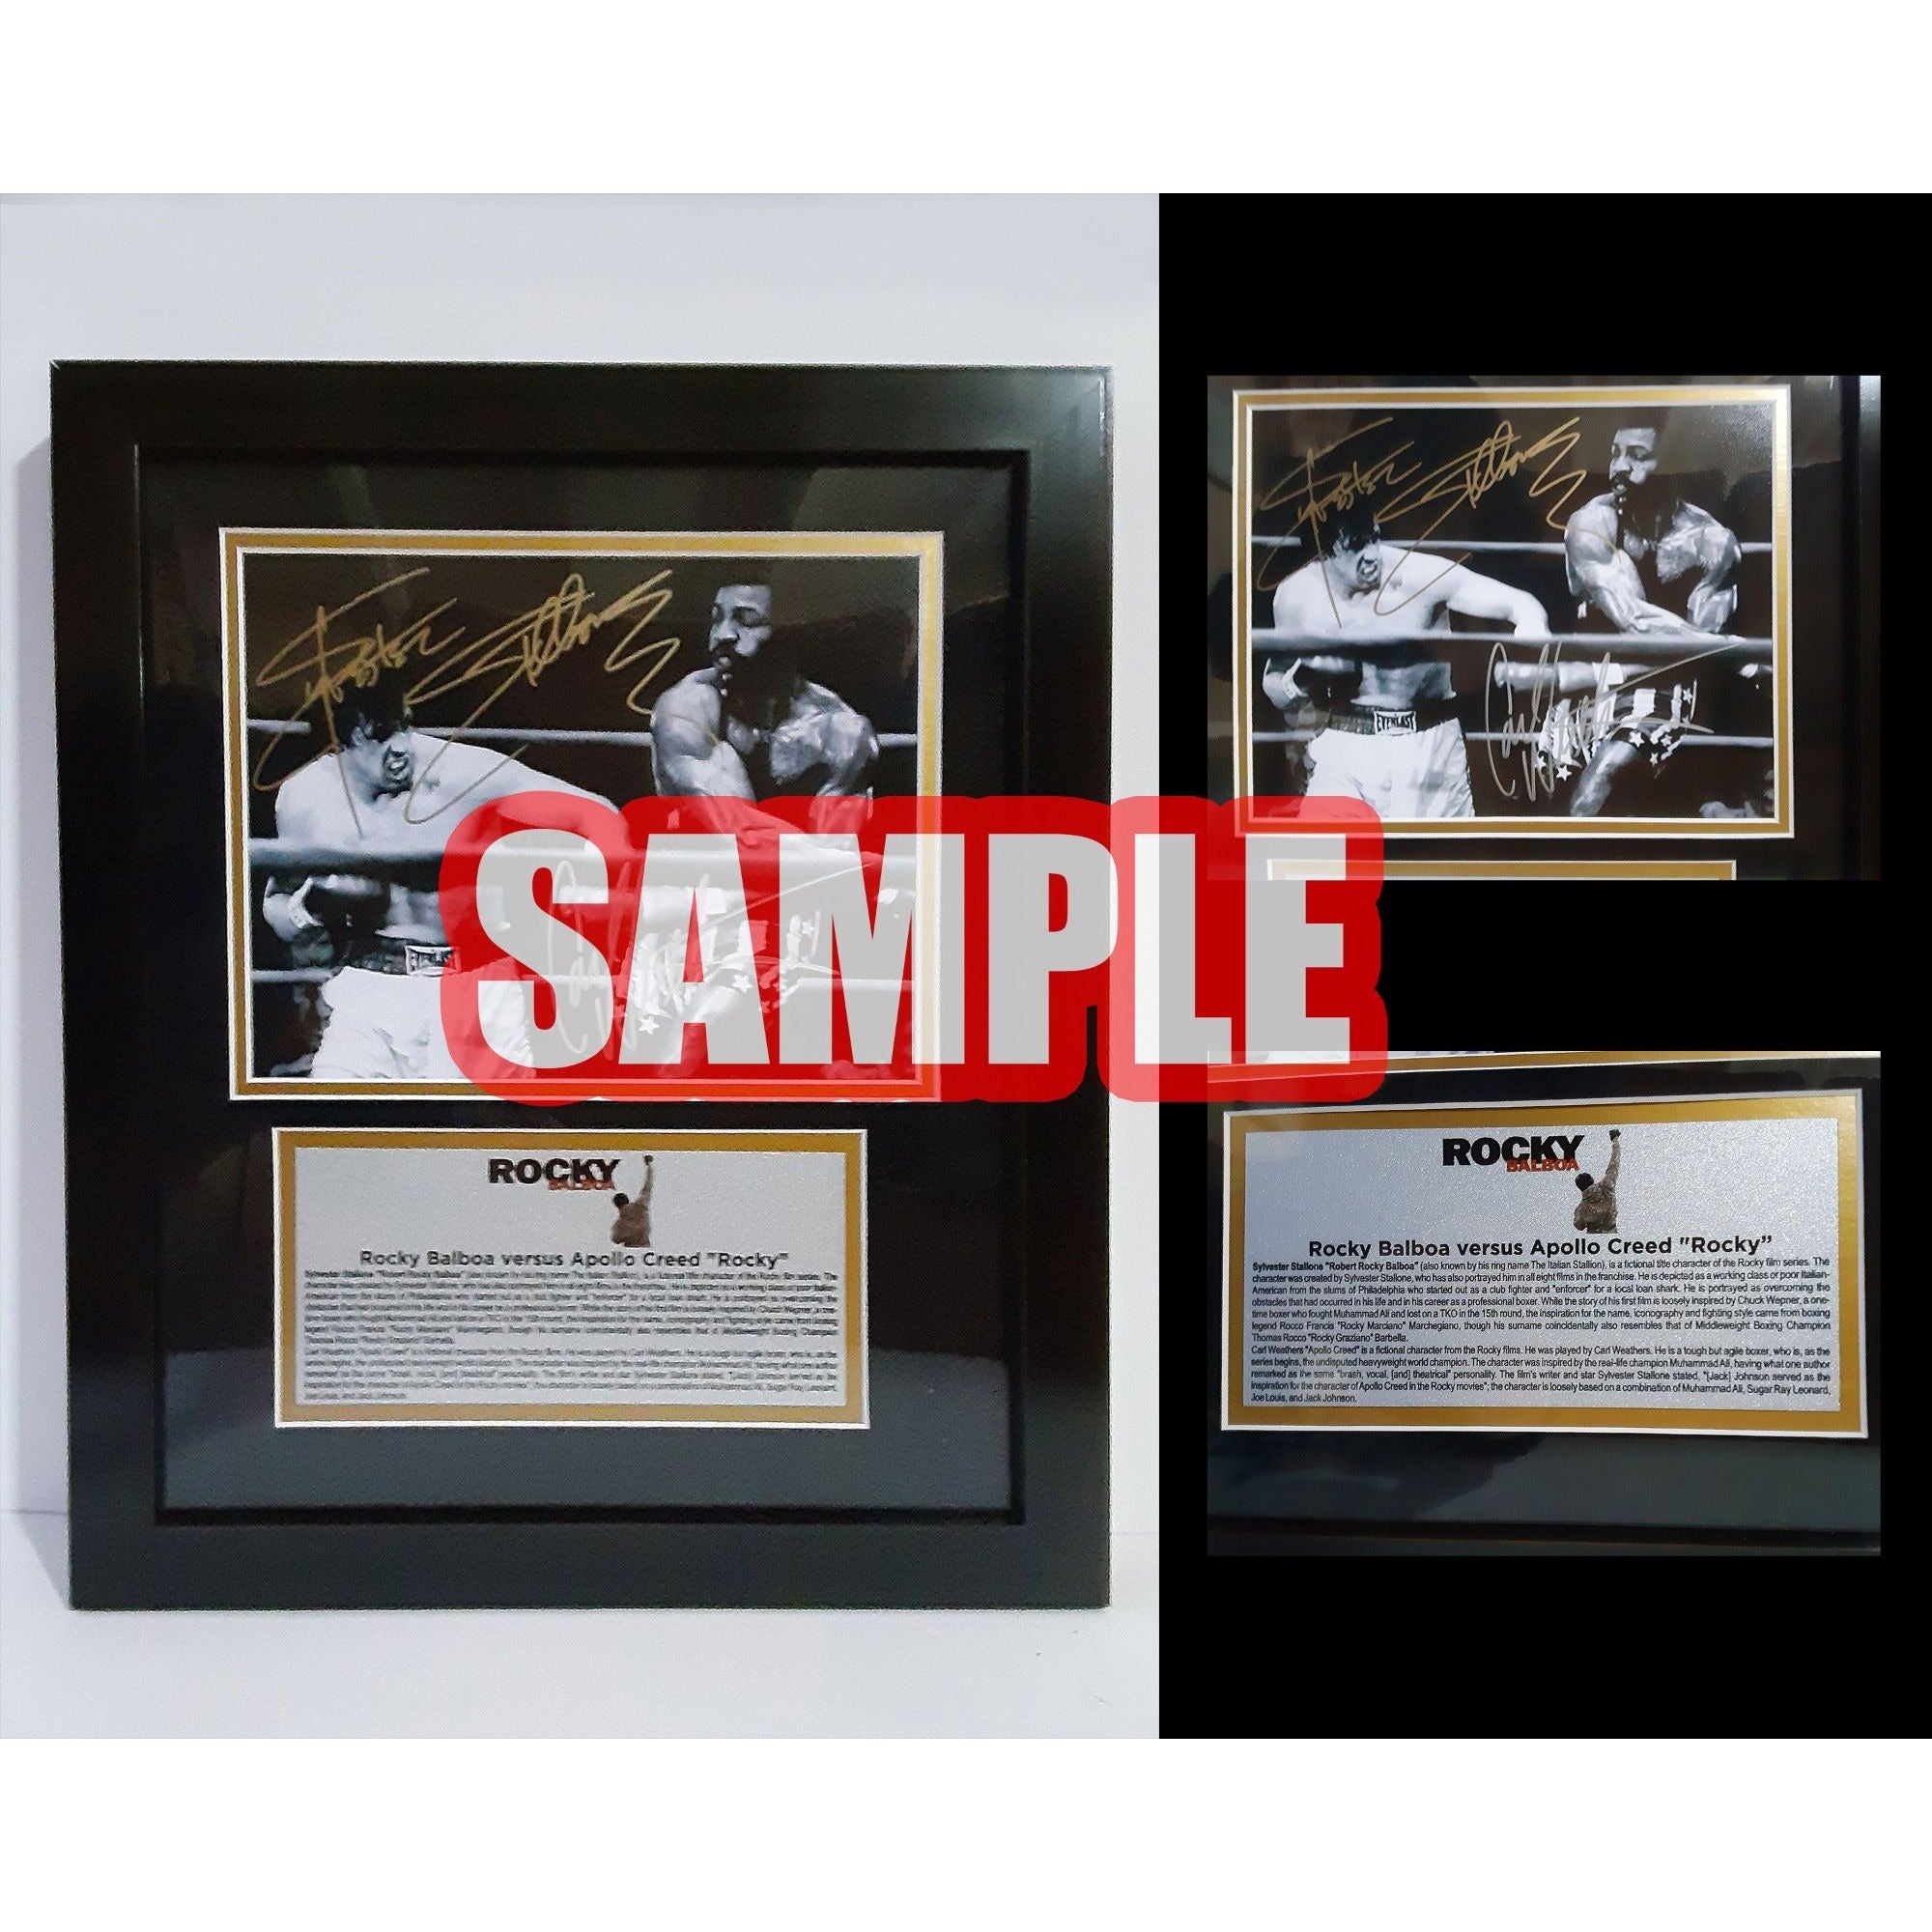 Ryne Sandberg, Bruce Sooter, Greg Maddux Chicago Cubs signed 8 by 10 photo signed with proof